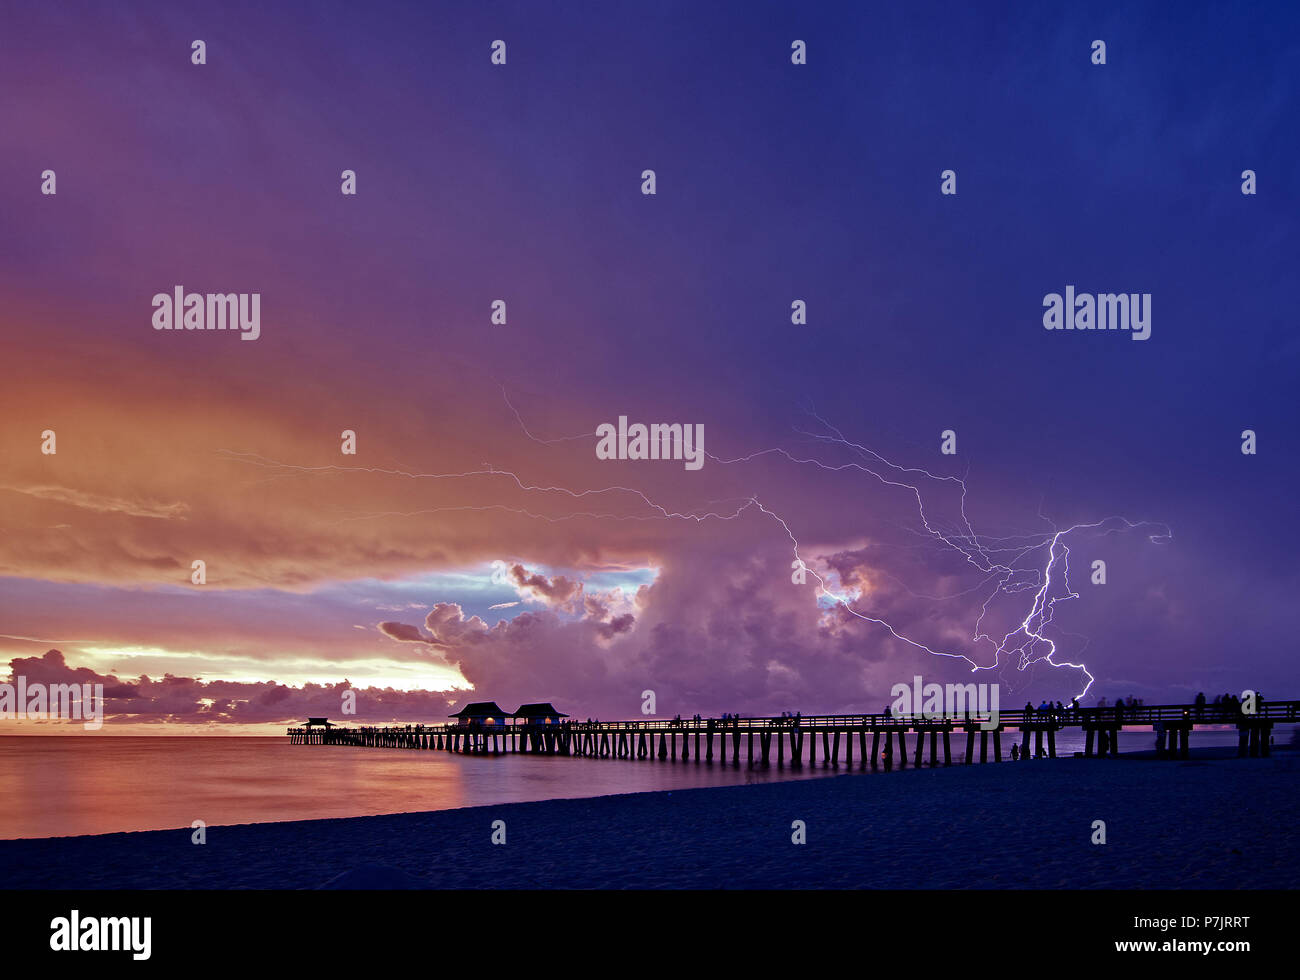 Lightning over Tampa bay - Stock Image - E145/0206 - Science Photo